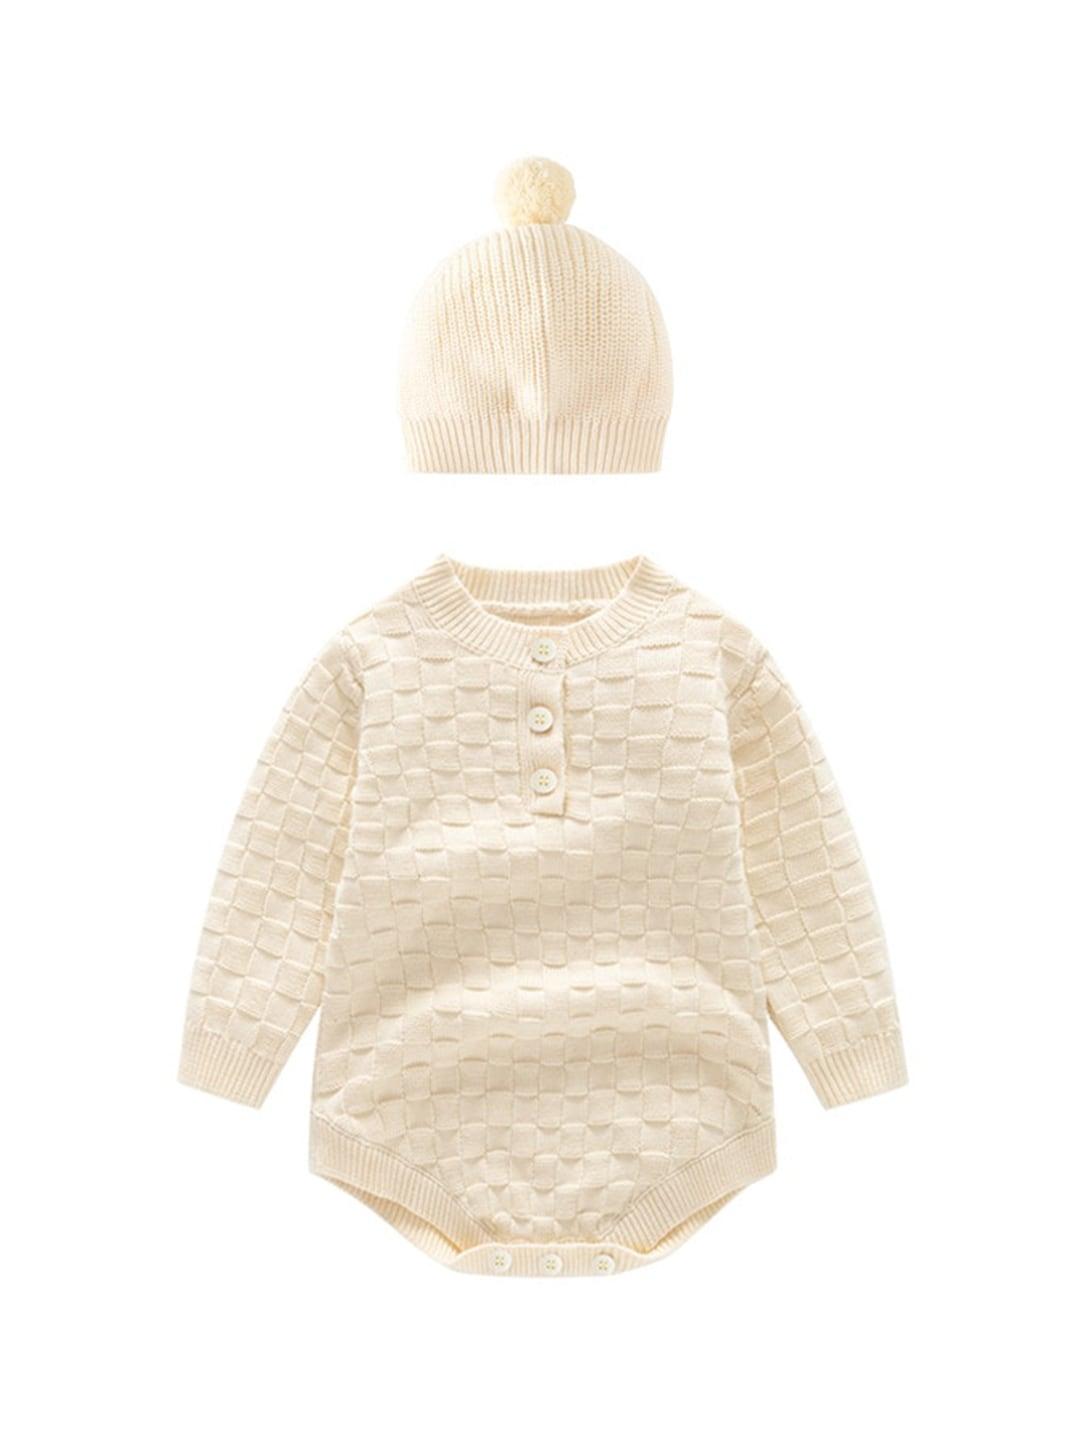 stylecast off white infant kids knitted cotton rompers with beanie